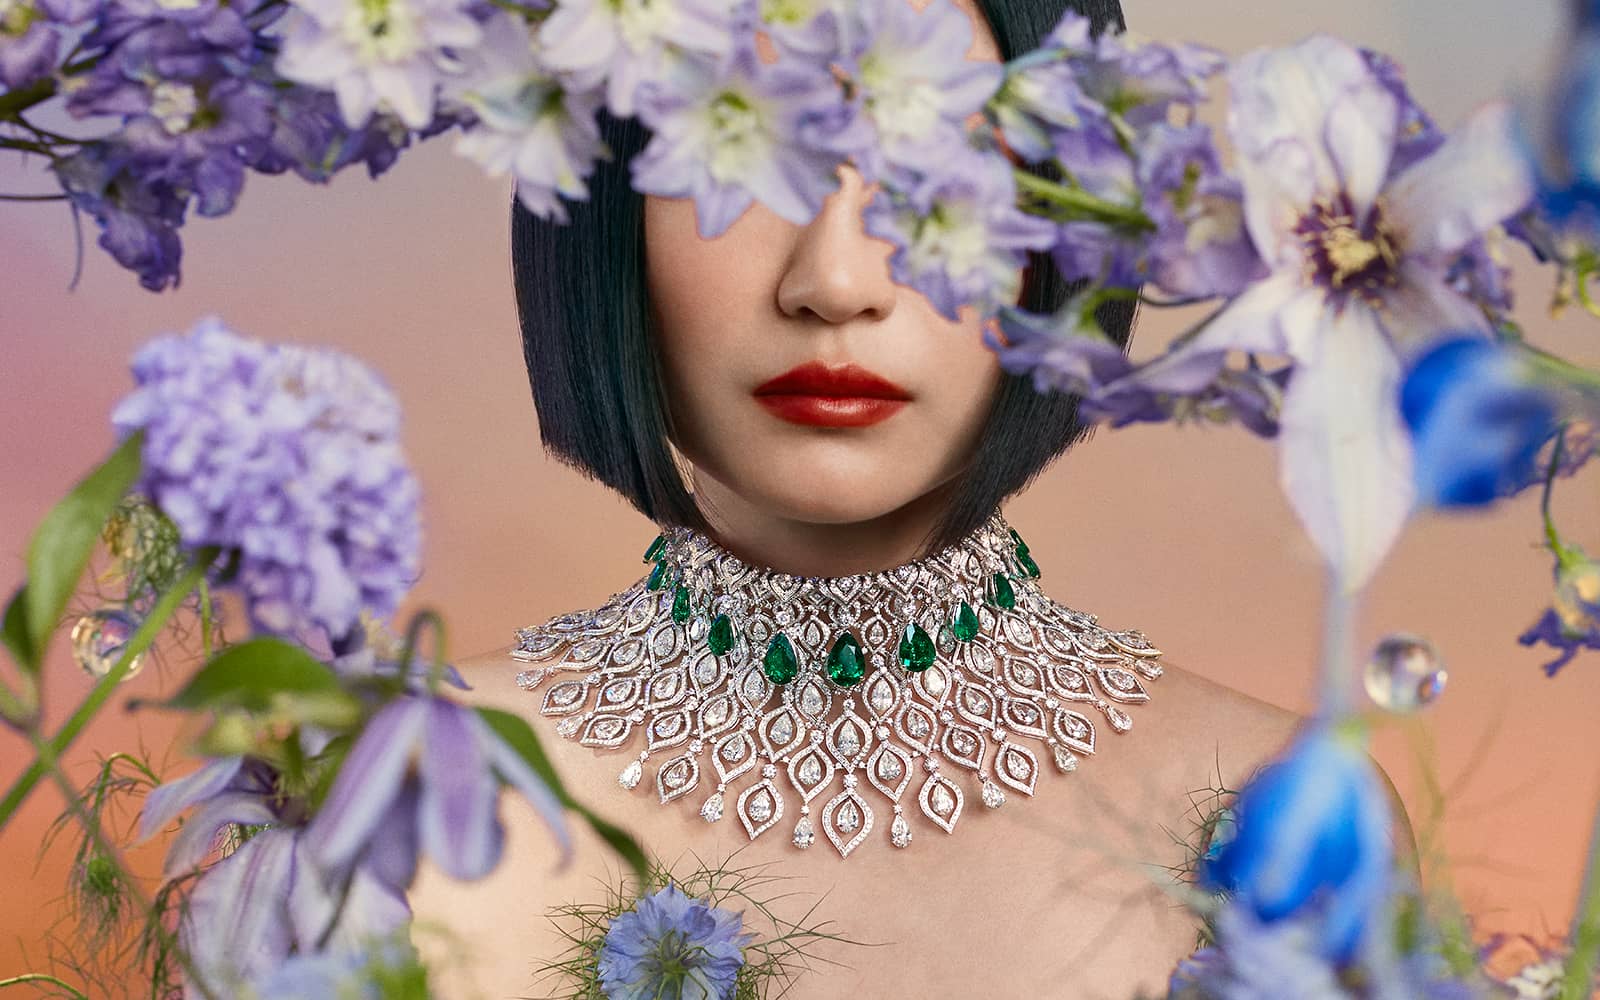 Bulgari Emerald Glory necklace with 73 pear-shaped diamonds of 110.39 carats, further diamonds for 220 carats, and 11 pear-shaped Colombian emeralds, totalling 42.02 carats, from the Eden The Garden of Wonders High Jewellery collection